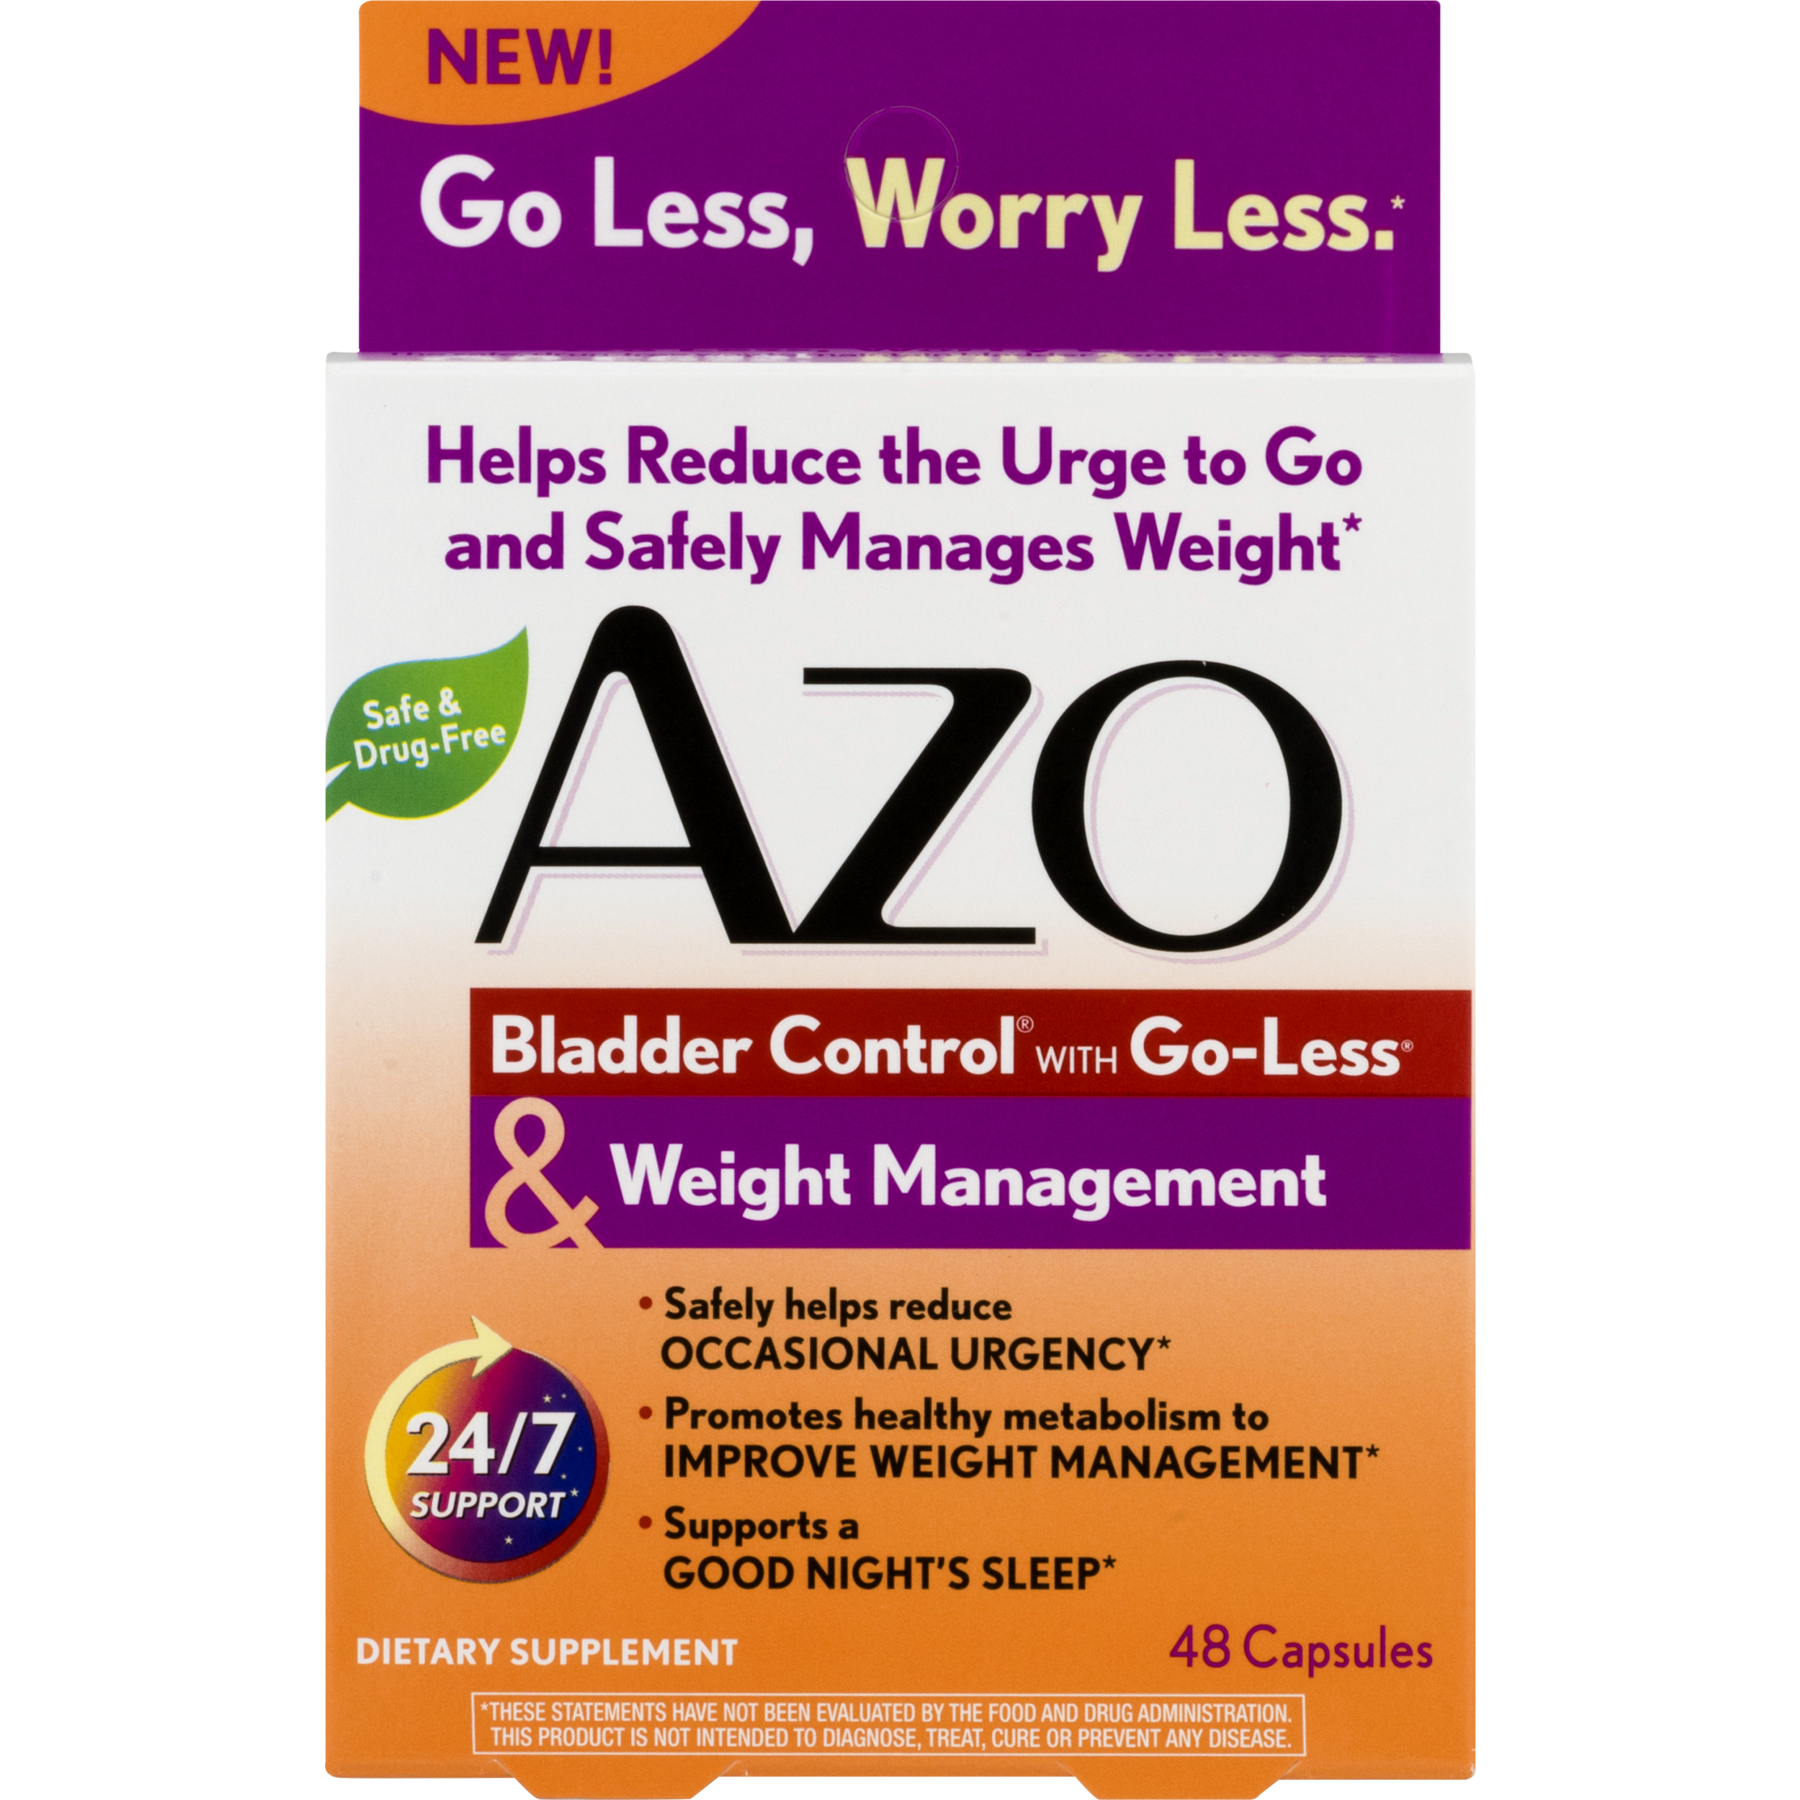 AZO Bladder Control and Weight Management Dietary Supplement, 48 Capsules - image 5 of 8